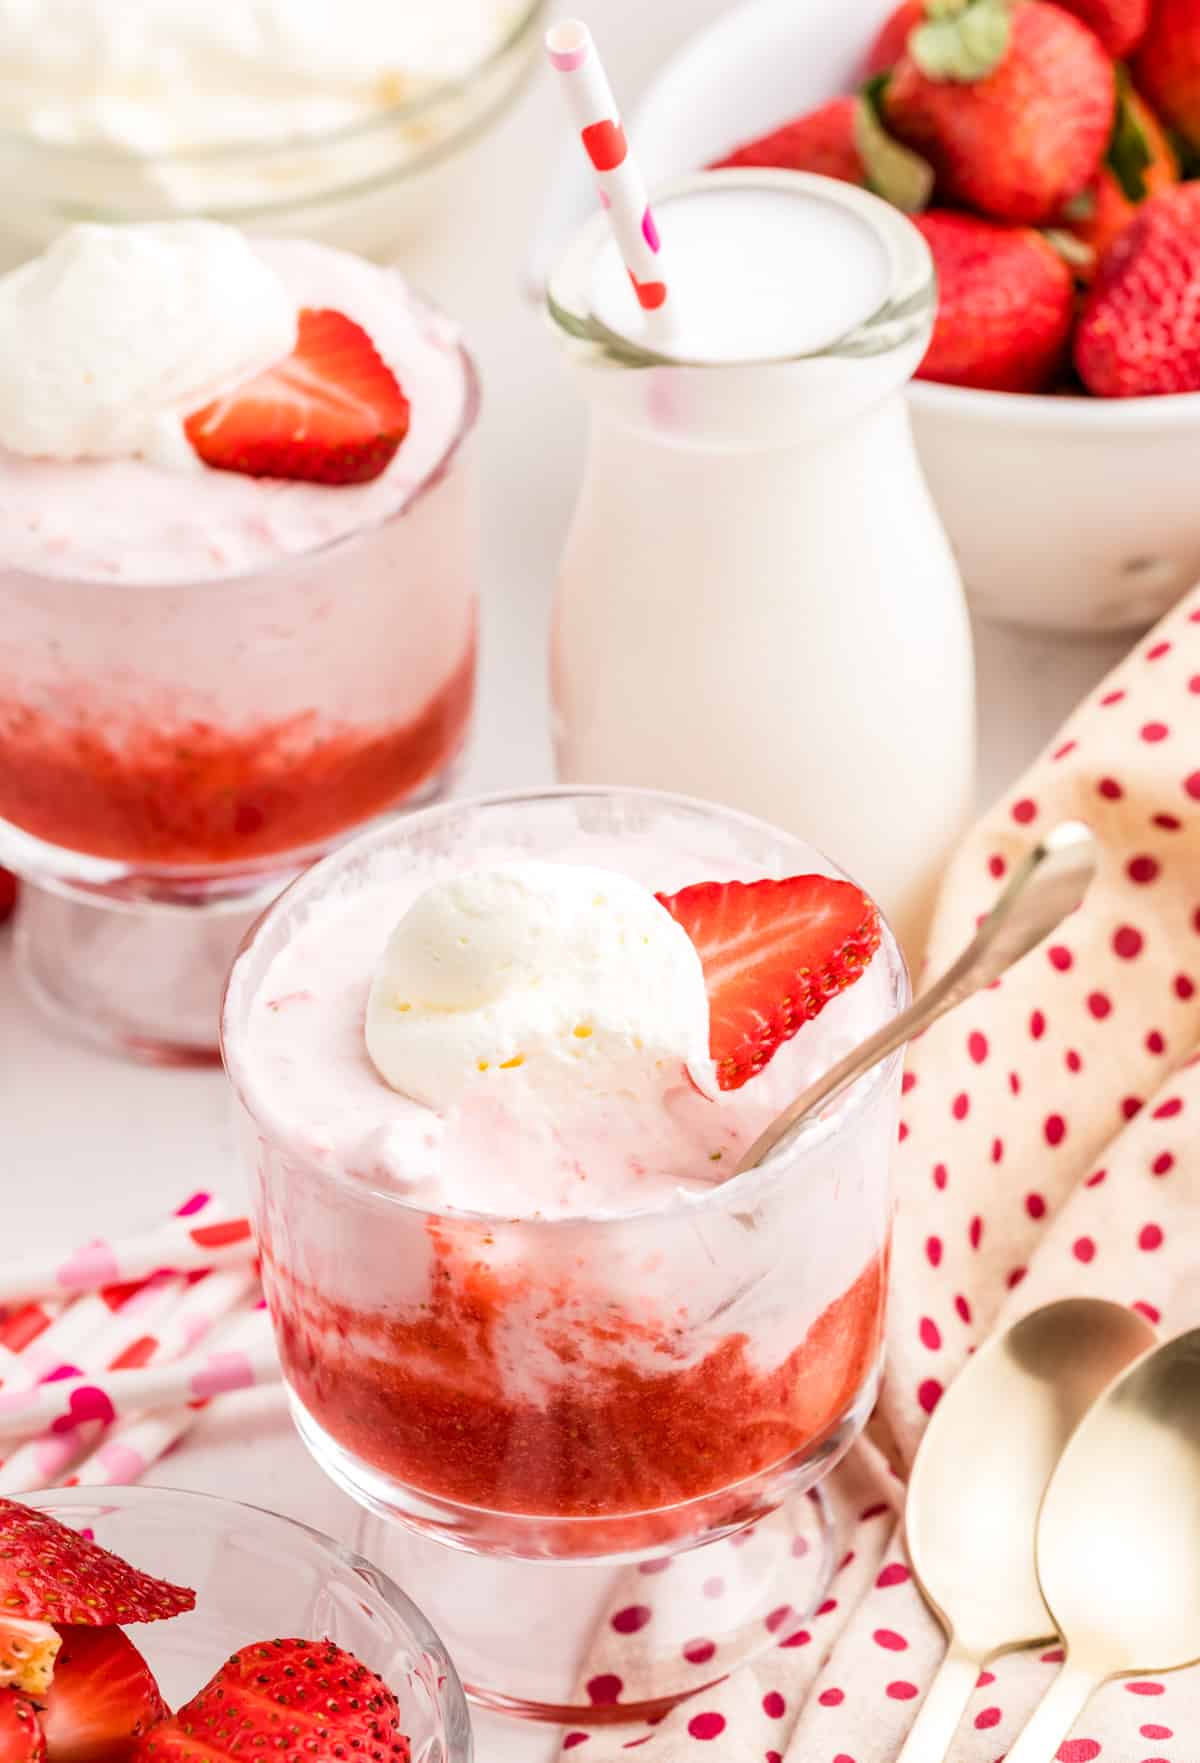 Strawberry Mousse in serving dishes with a spoonful taken out.